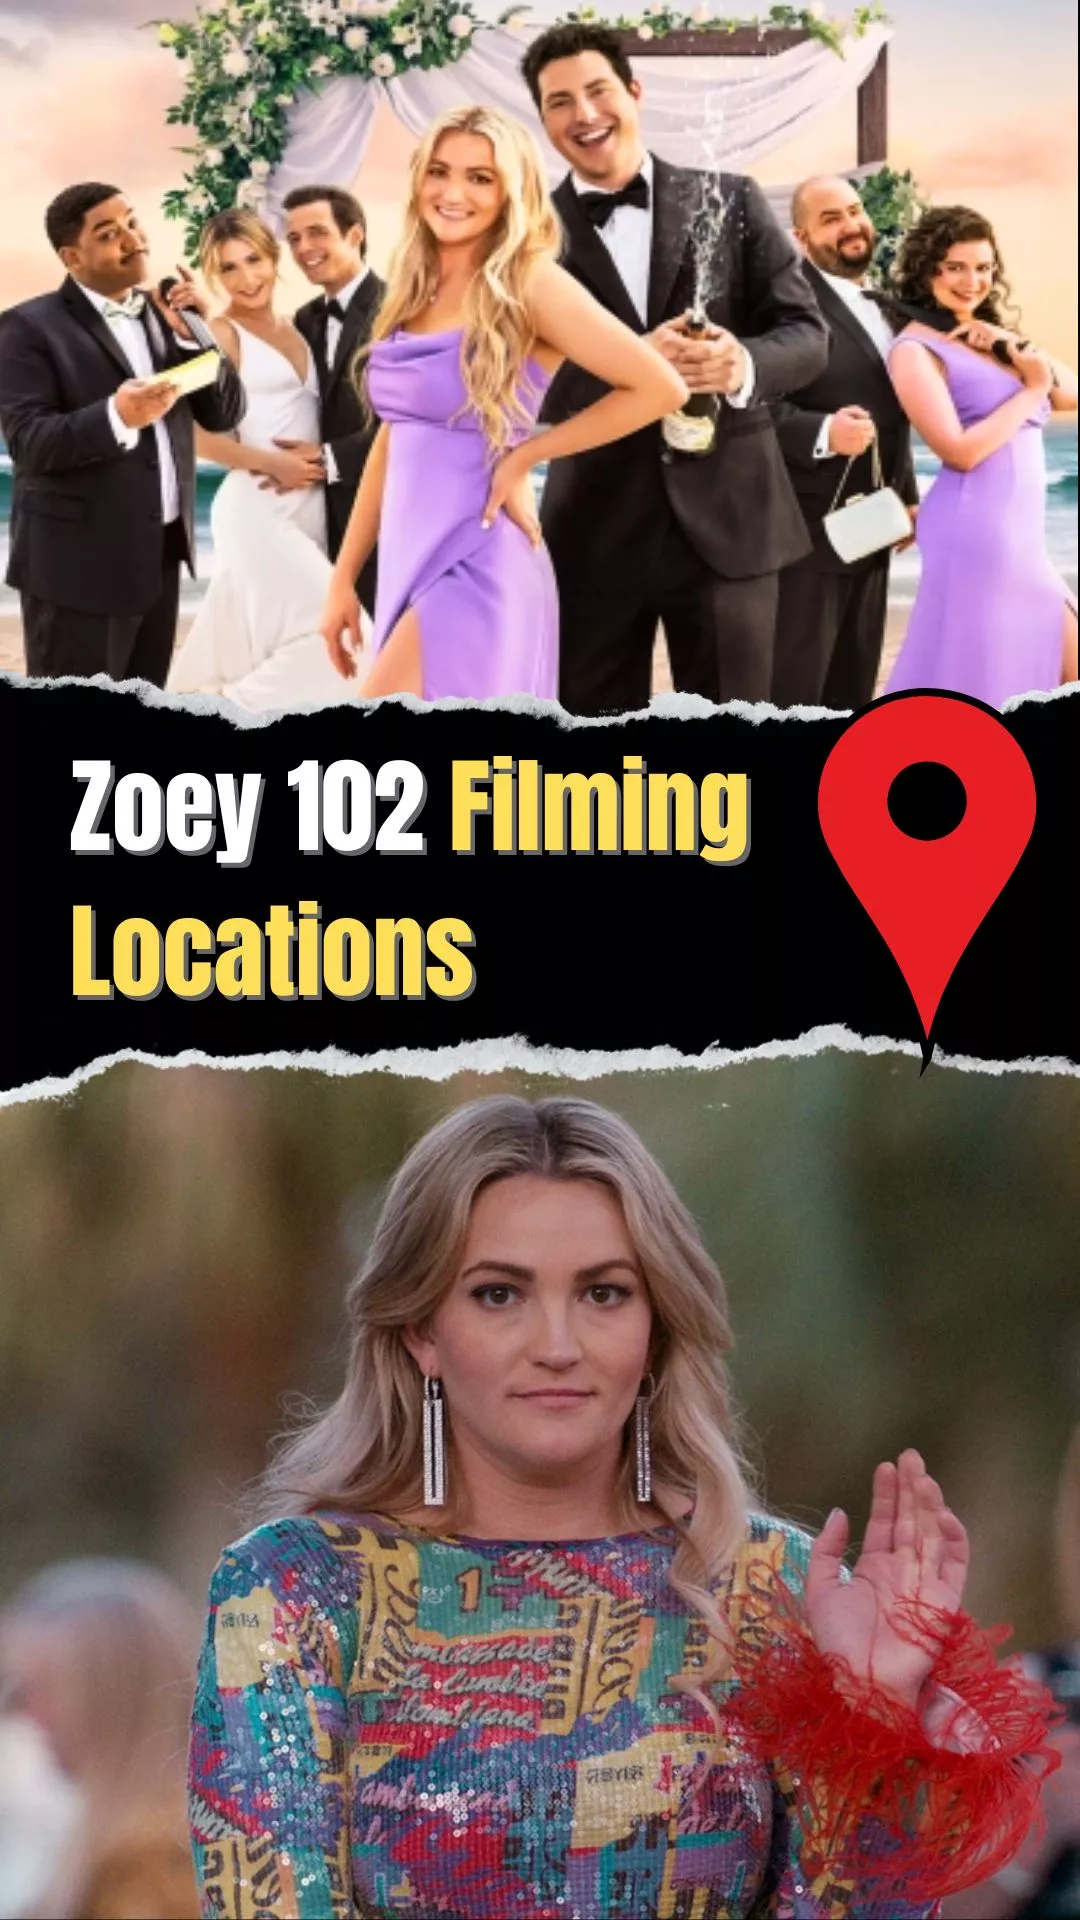 Zoey 102 Filming Locations